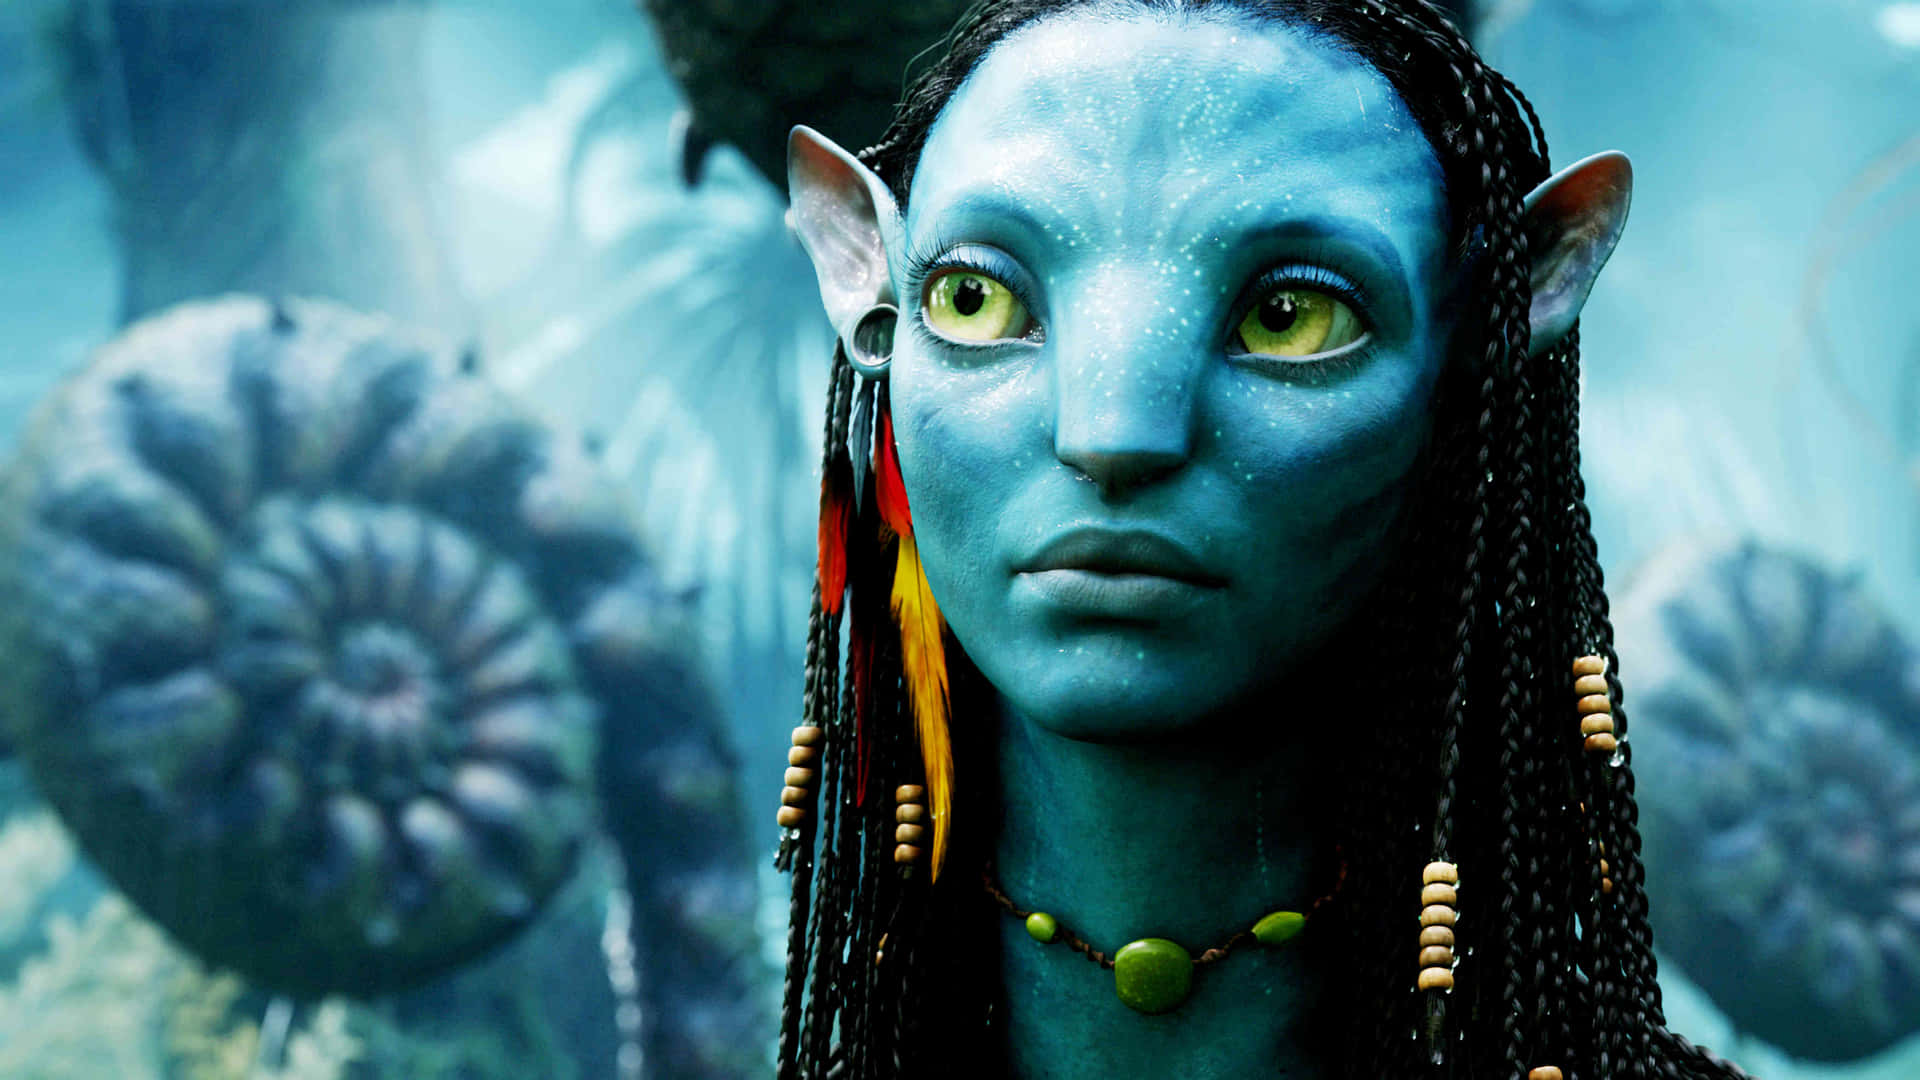 “Explore New Worlds and Cultures with Avatar”